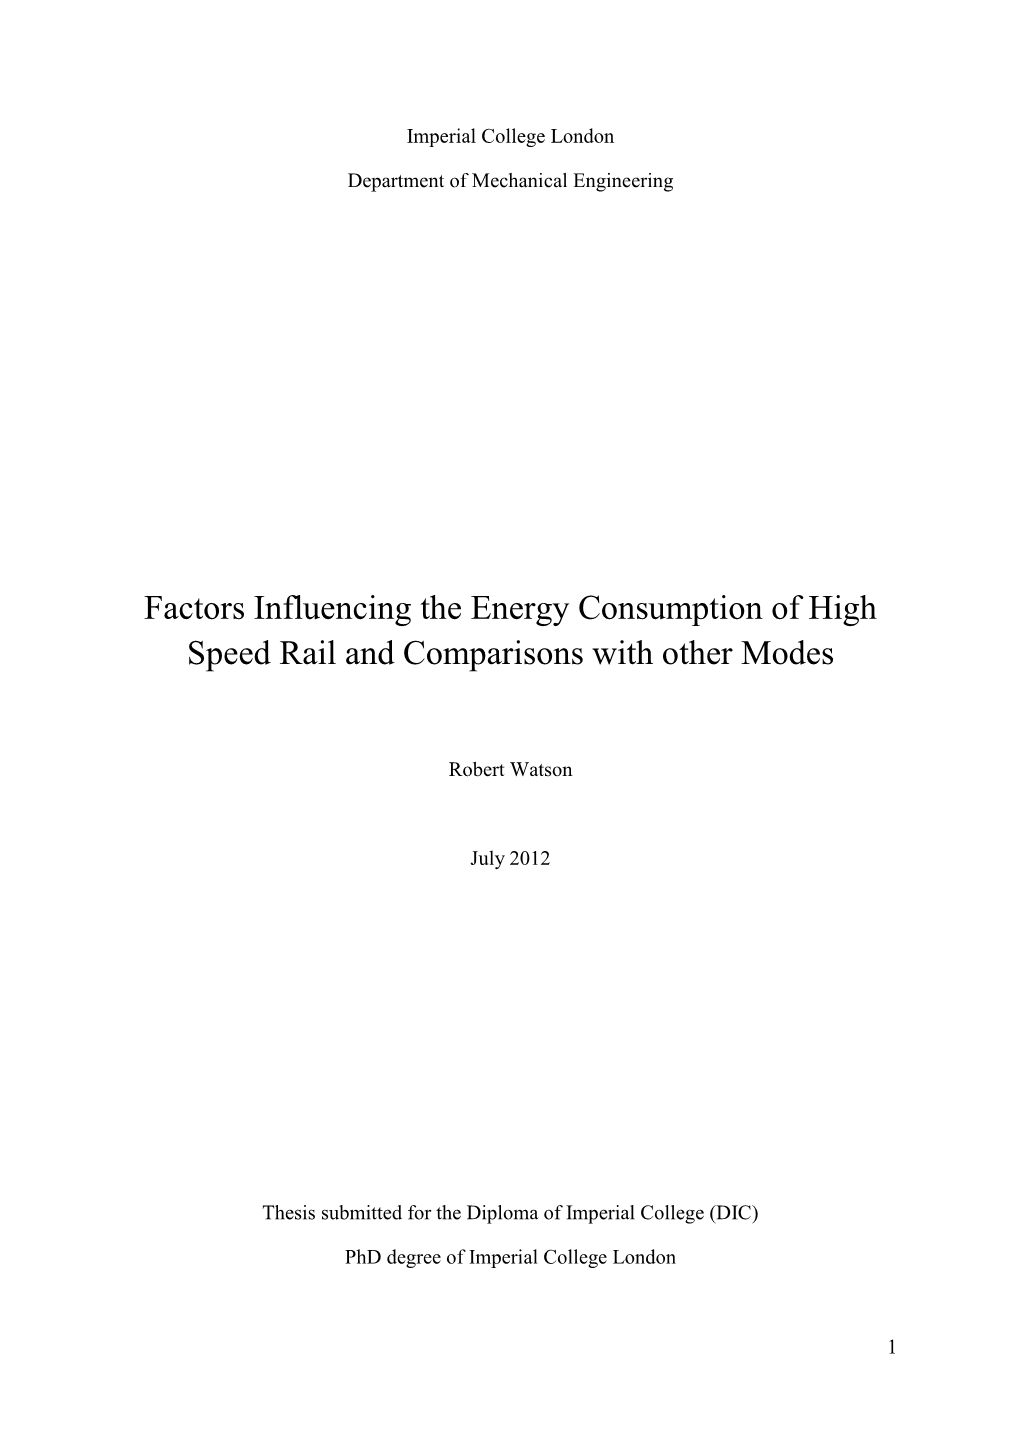 Factors Influencing the Energy Consumption of High Speed Rail and Comparisons with Other Modes